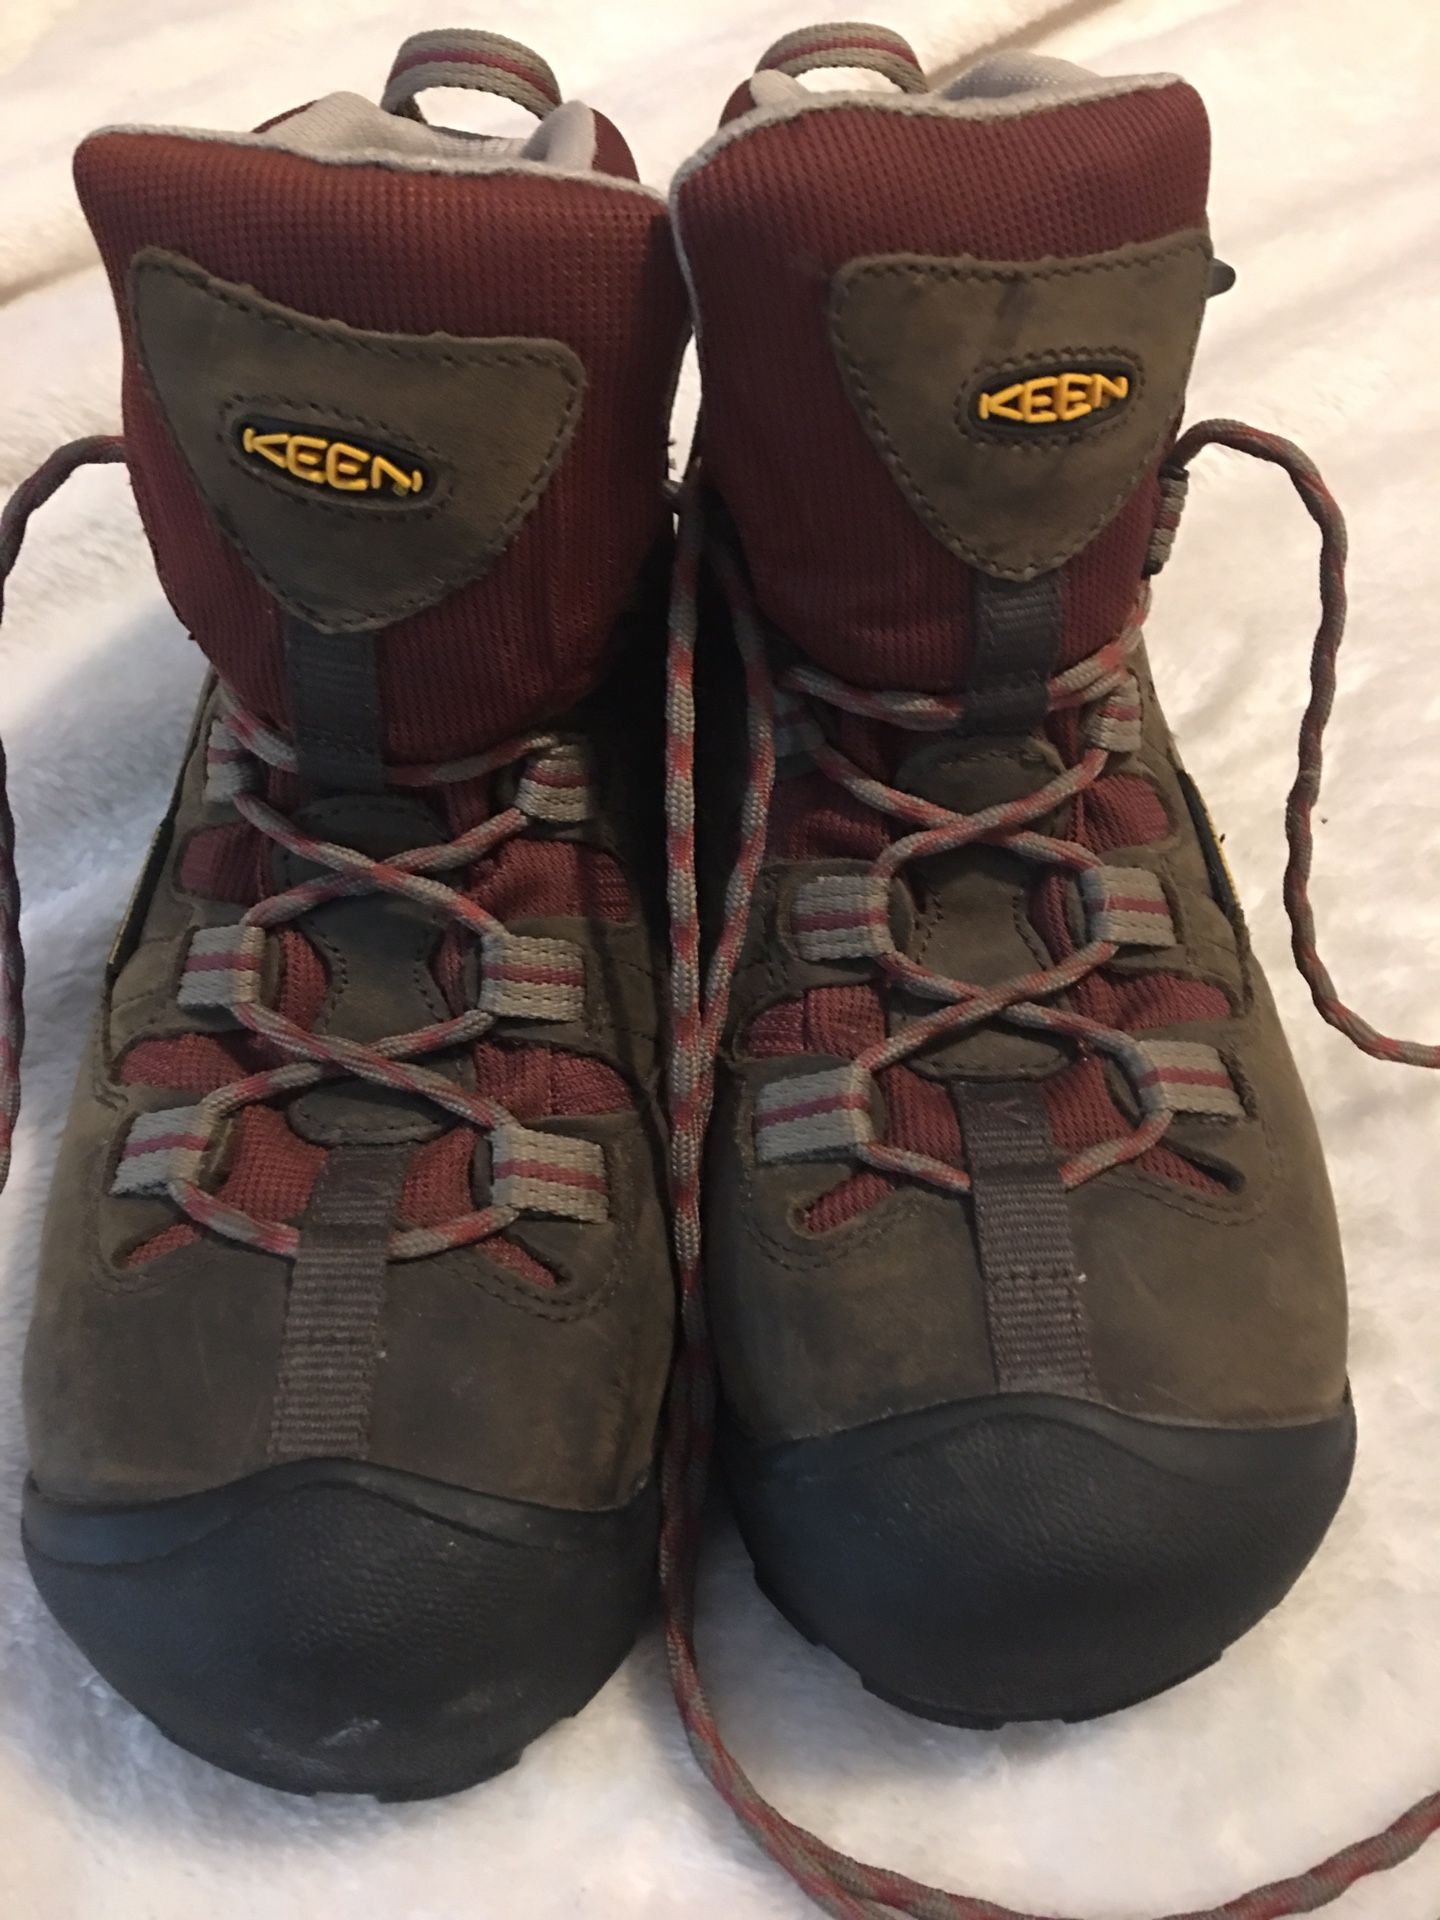 Keen Work Boots Size 9US